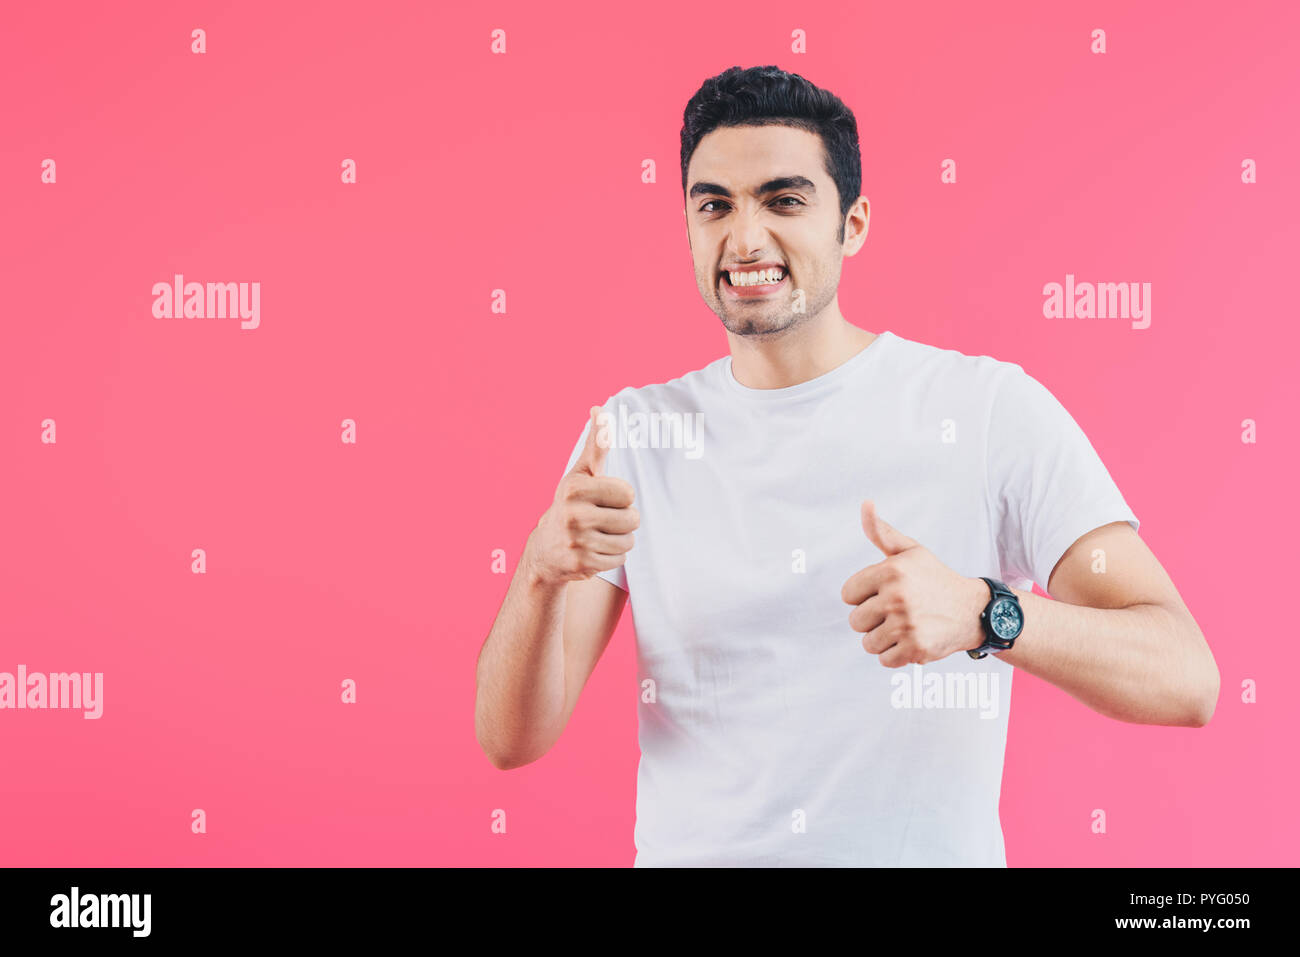 grimacing smiling man showing thumbs up isolated on pink Stock Photo ...